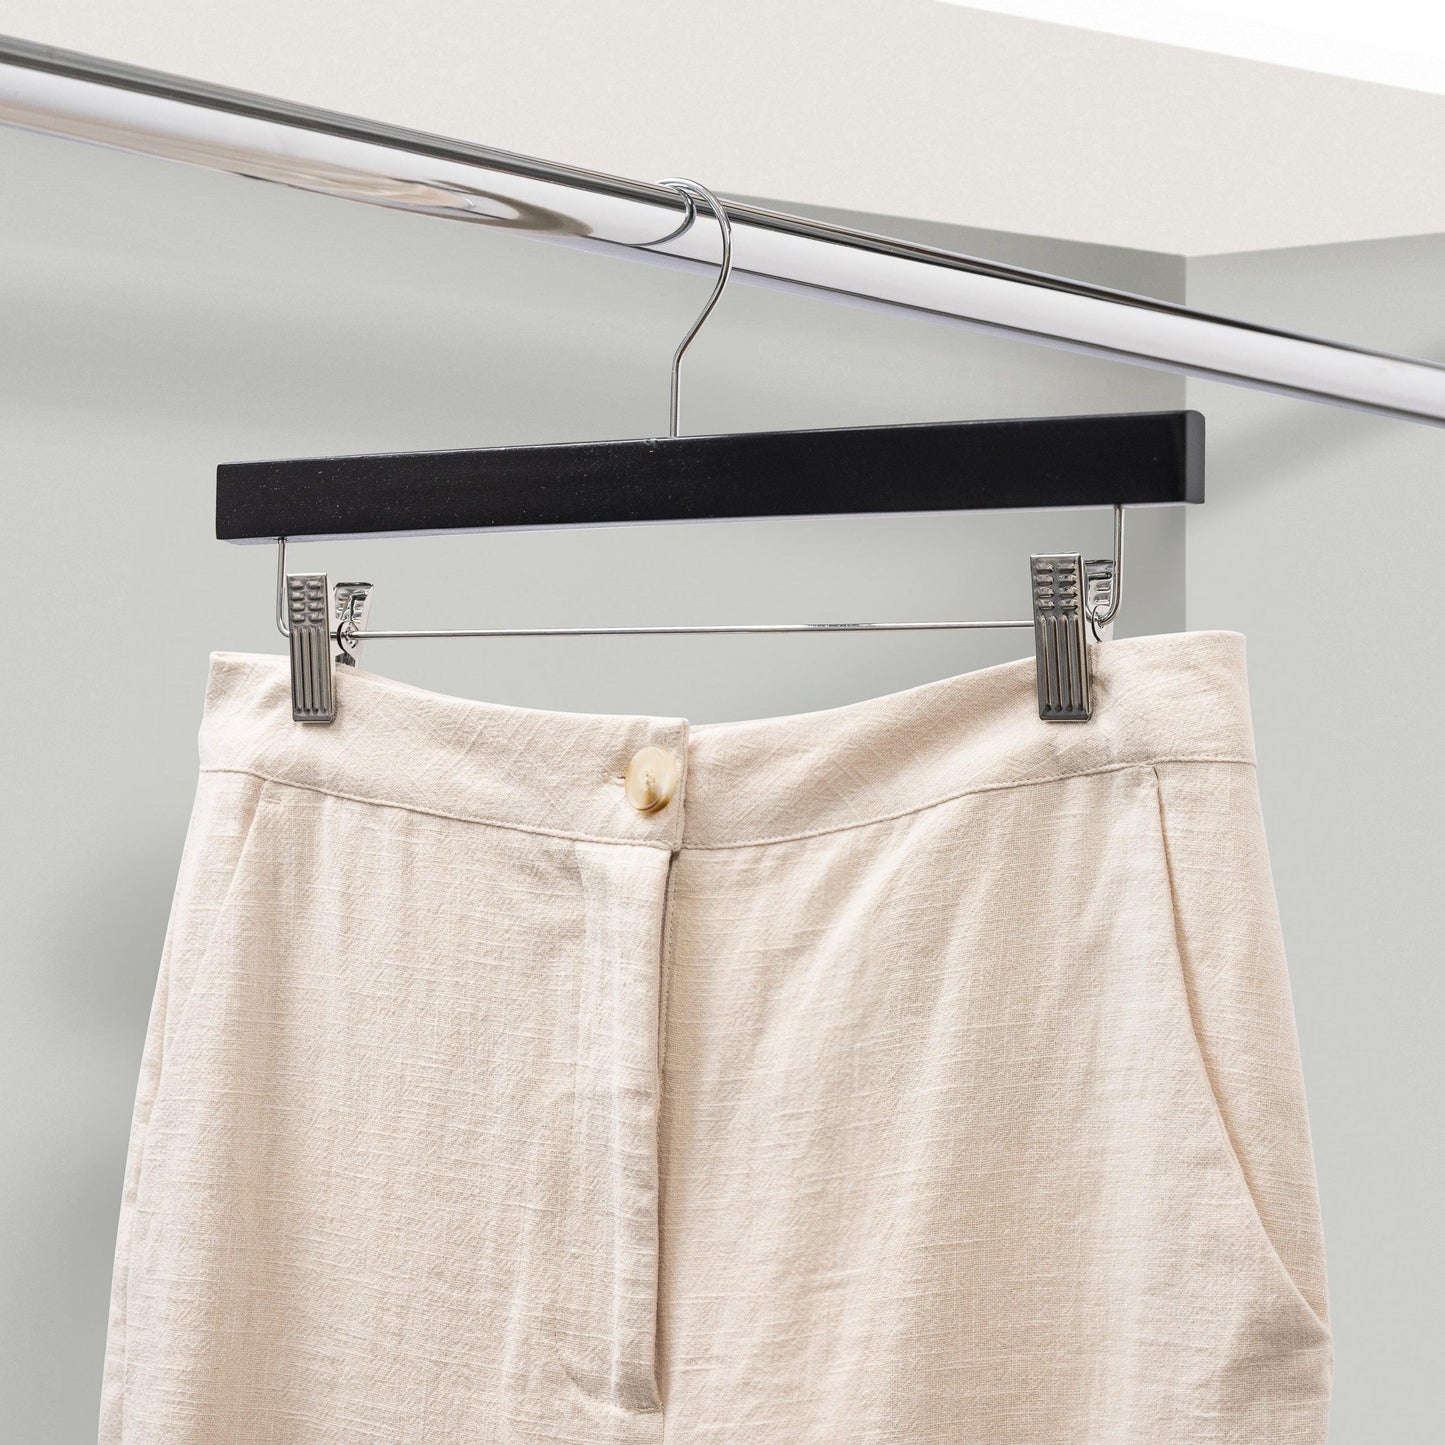 Black Wood Pant Hanger With Clips - 35.5cm X 12mm Thick (Sold in 25/50/100) - Hangersforless